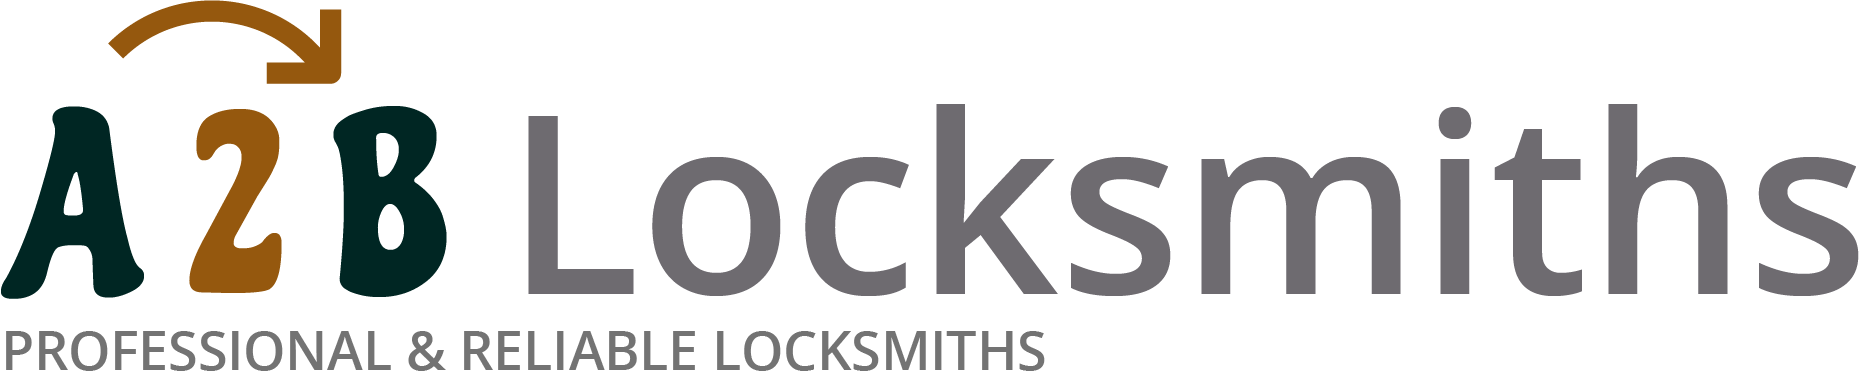 If you are locked out of house in Totteridge, our 24/7 local emergency locksmith services can help you.